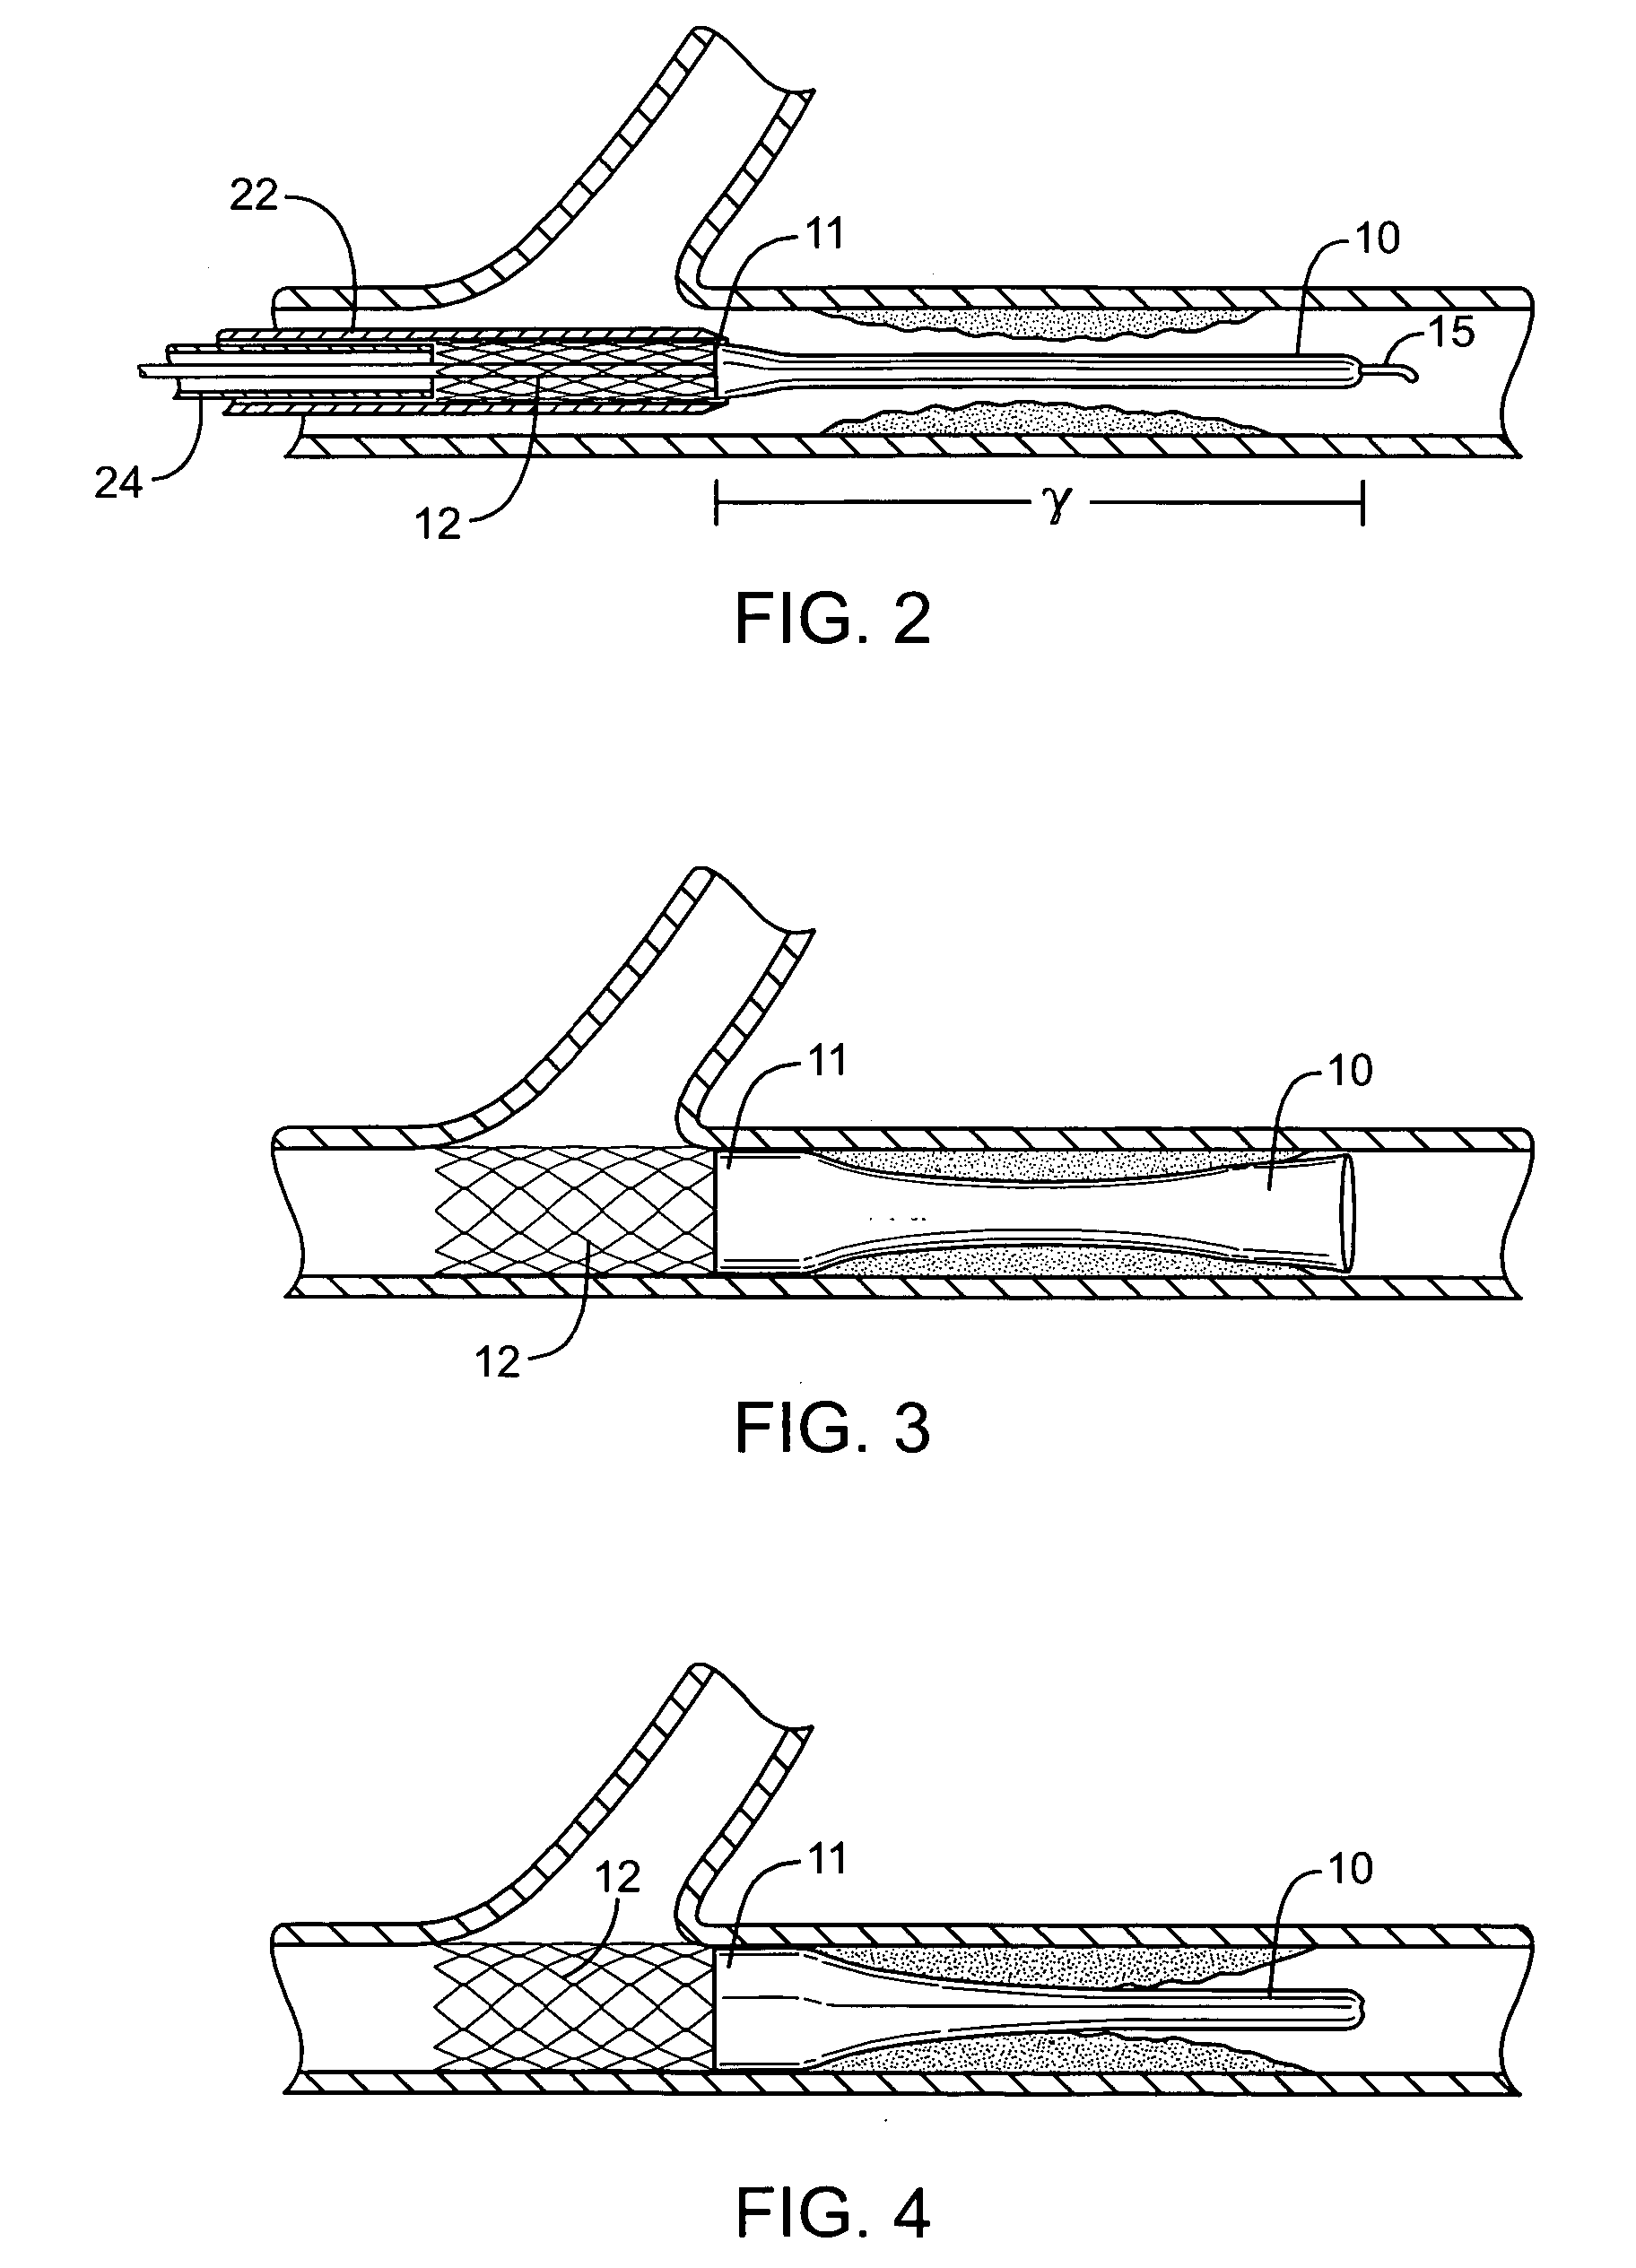 Methods and devices for protecting passageway in a body when advancing devices through the passageway